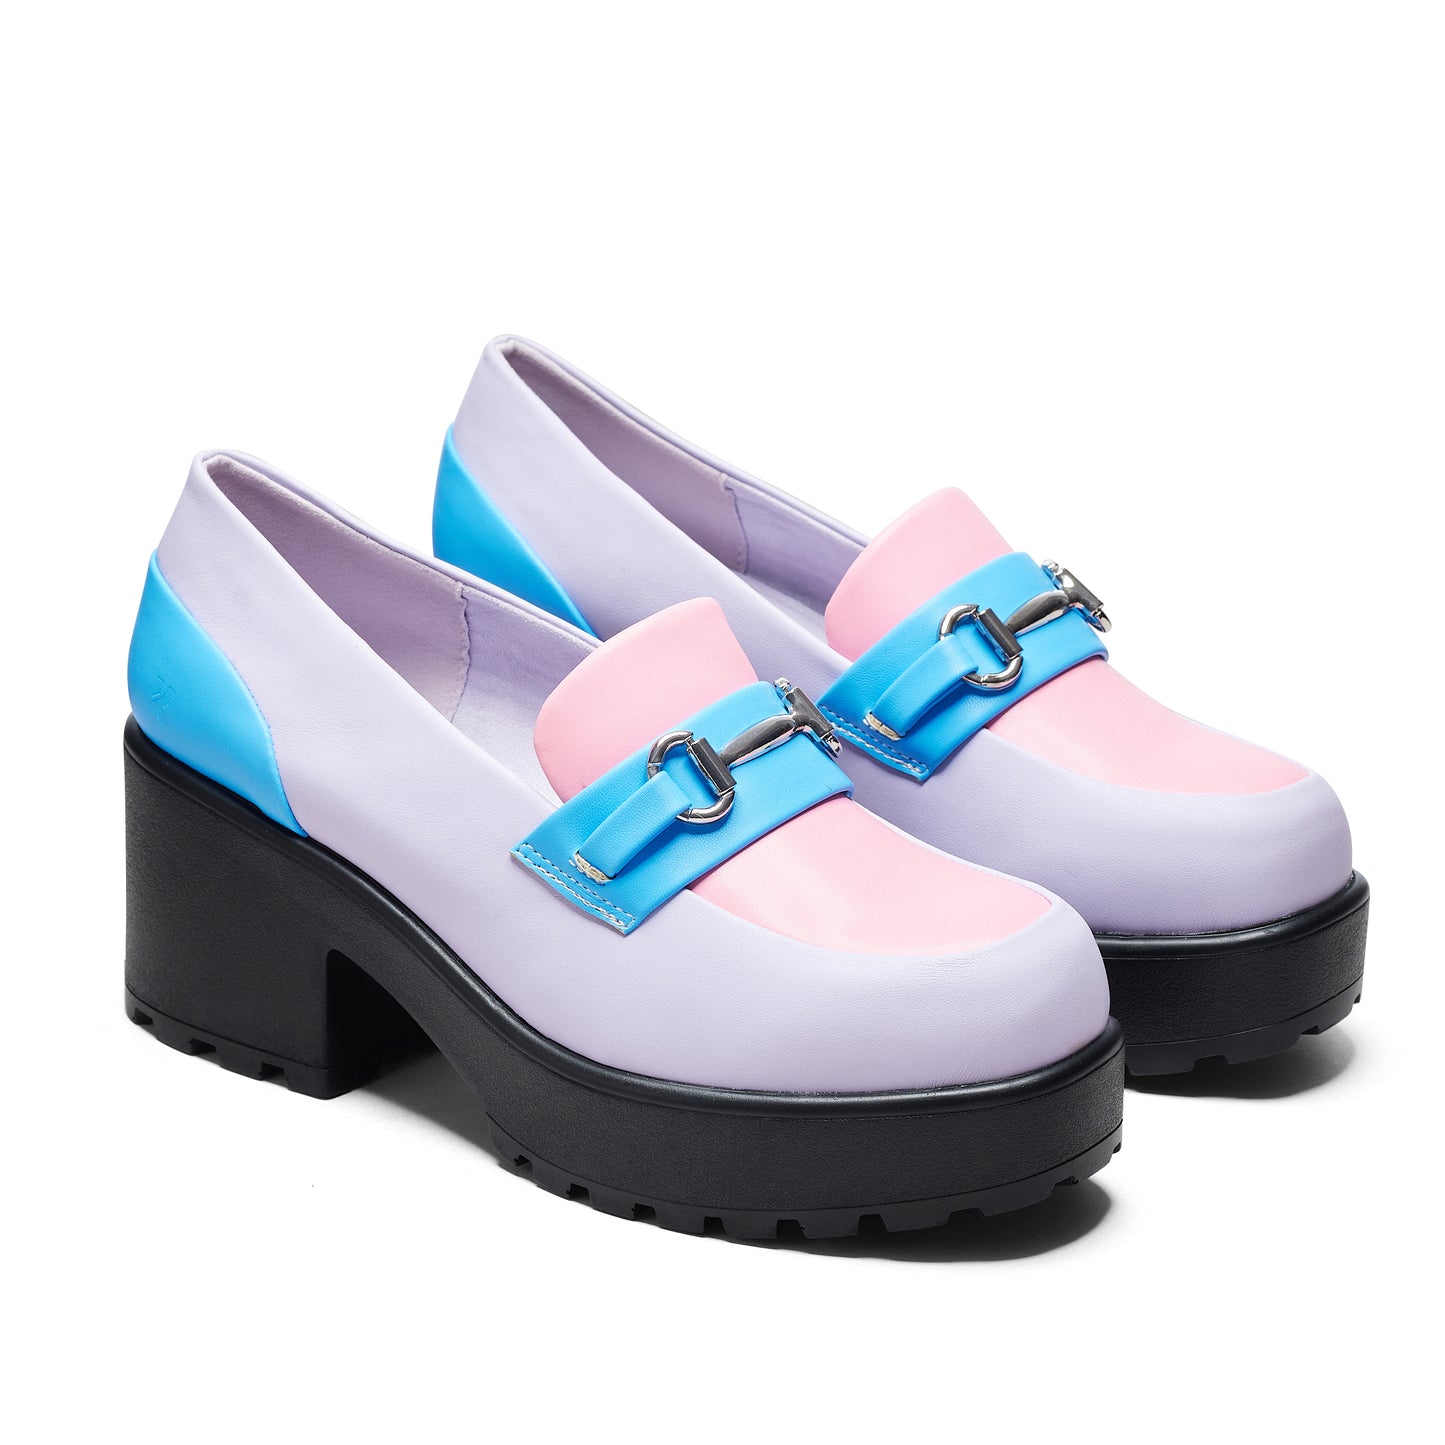 High Class Chunky Shoes - Pink Pastel - Shoes - KOI Footwear - Pink - Three-Quarter View